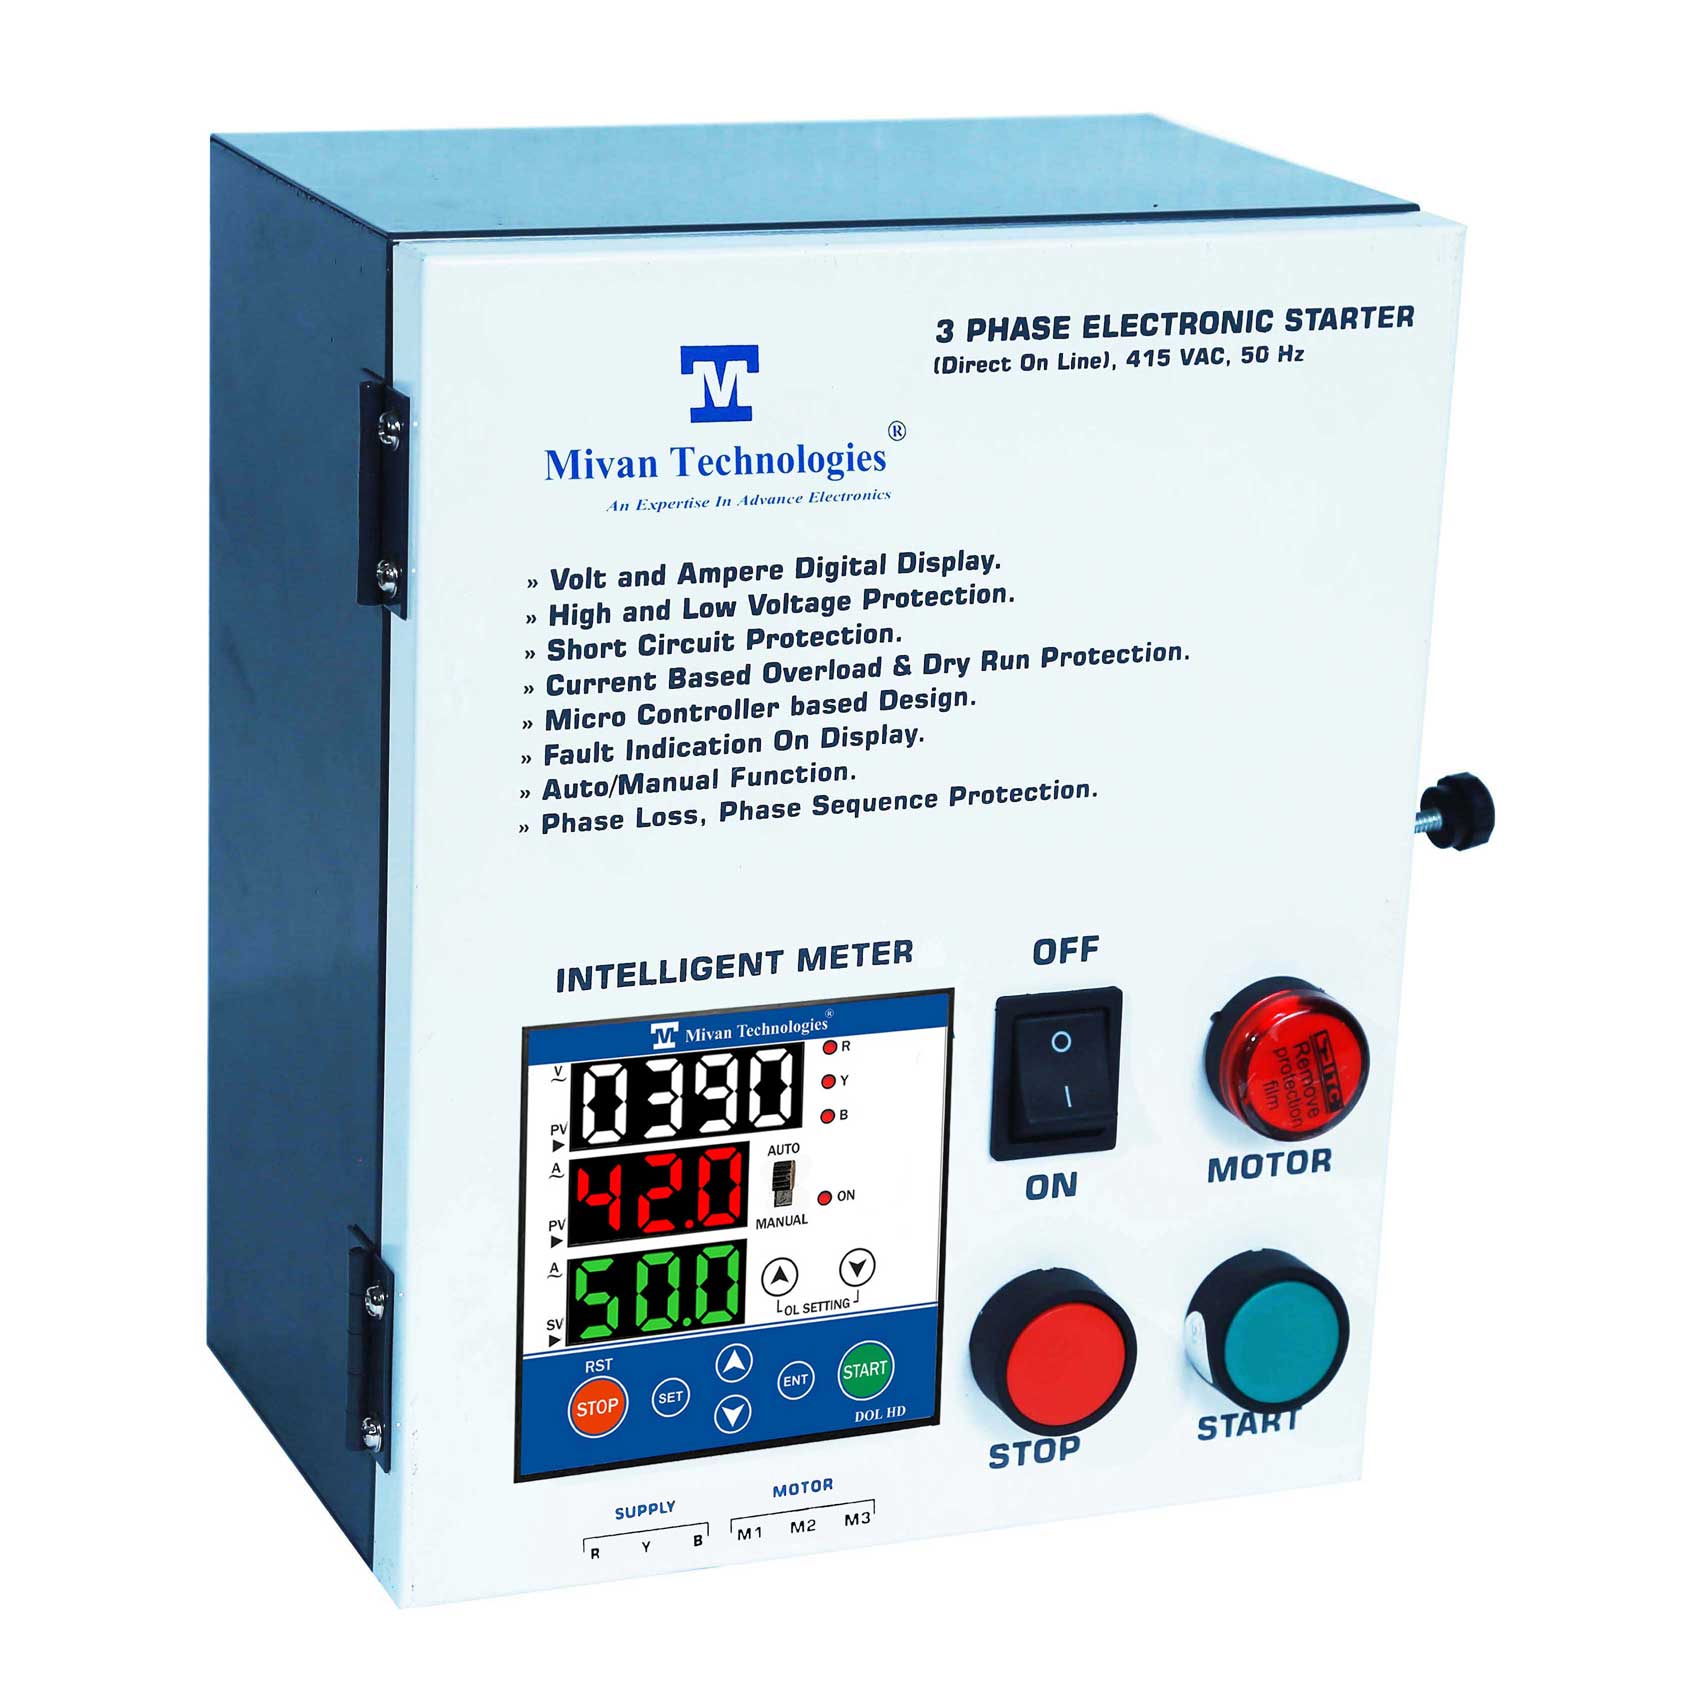 3 phase 3 display Heavy Duty DOL motor starter with HV LV OL Dry protection with Auto switch spp and timer suitable up to 50 hp DOL HD 3D 95 A